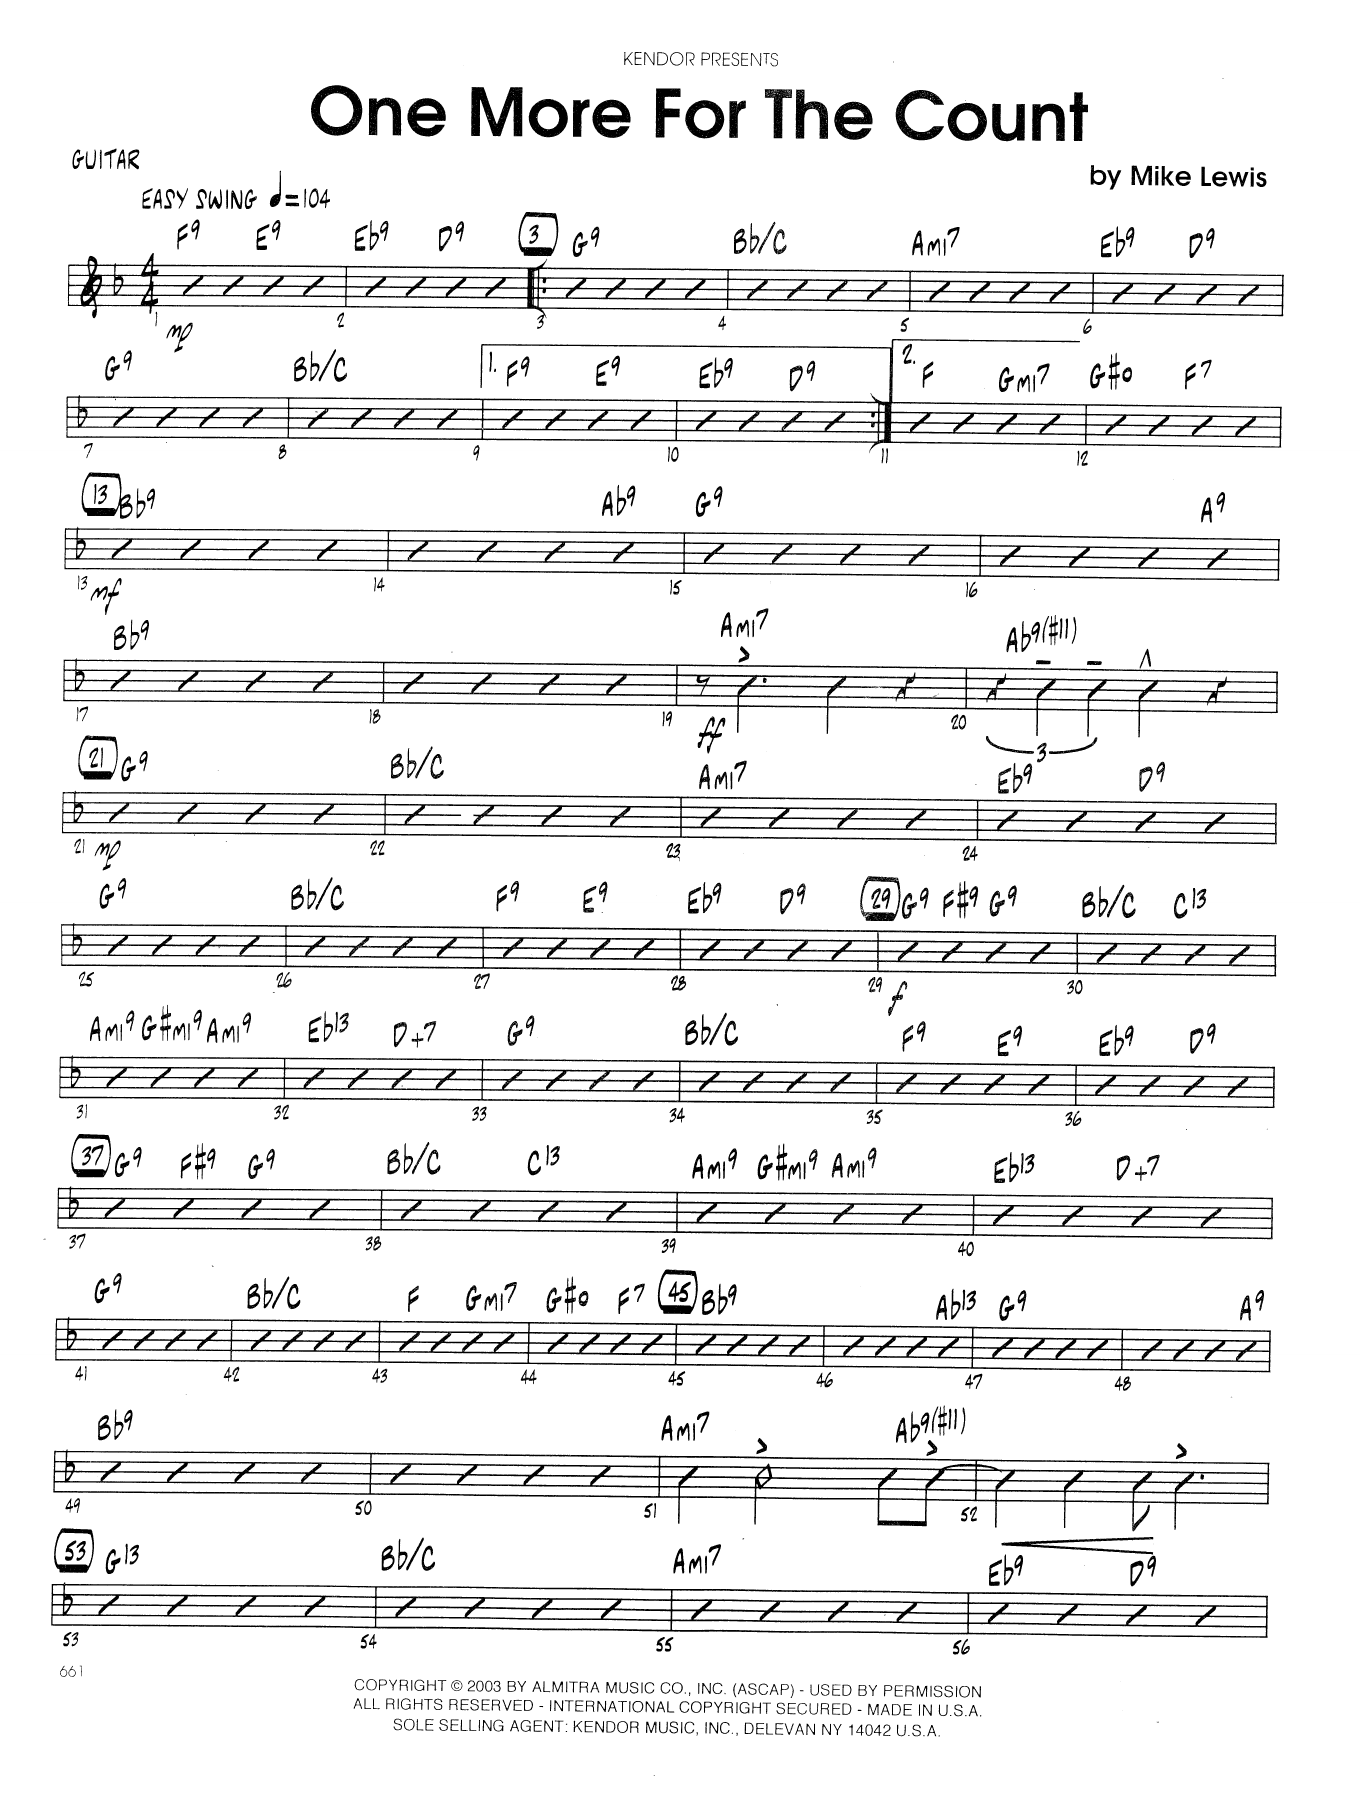 Download Mike Lewis One More For The Count - Guitar Sheet Music